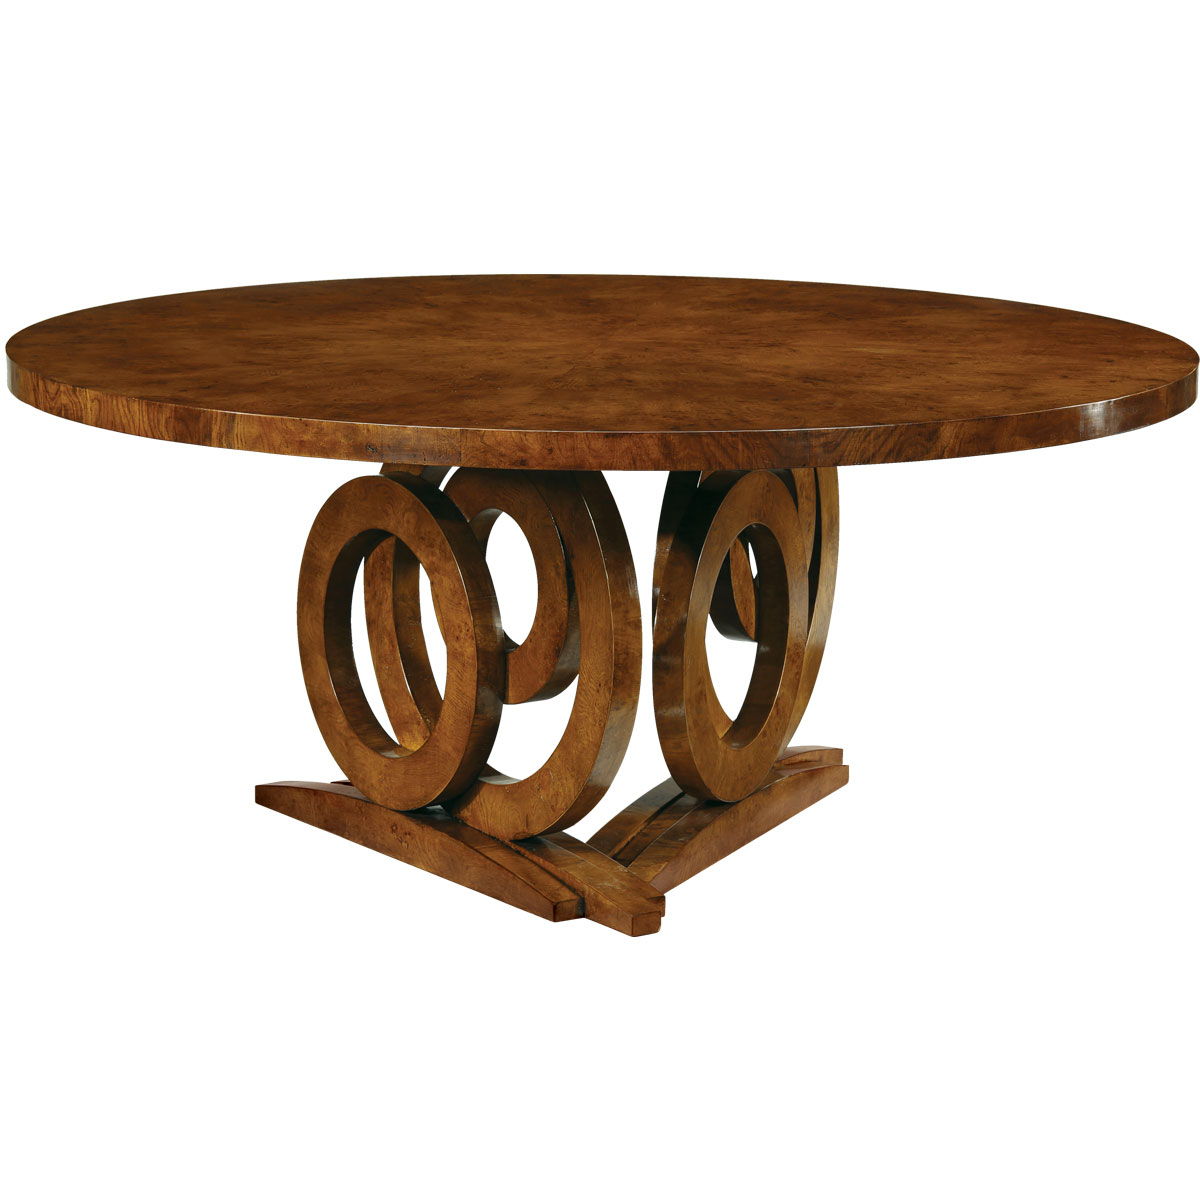 Art Deco Style Round Table, Art Deco Style Dining Table And Chairs